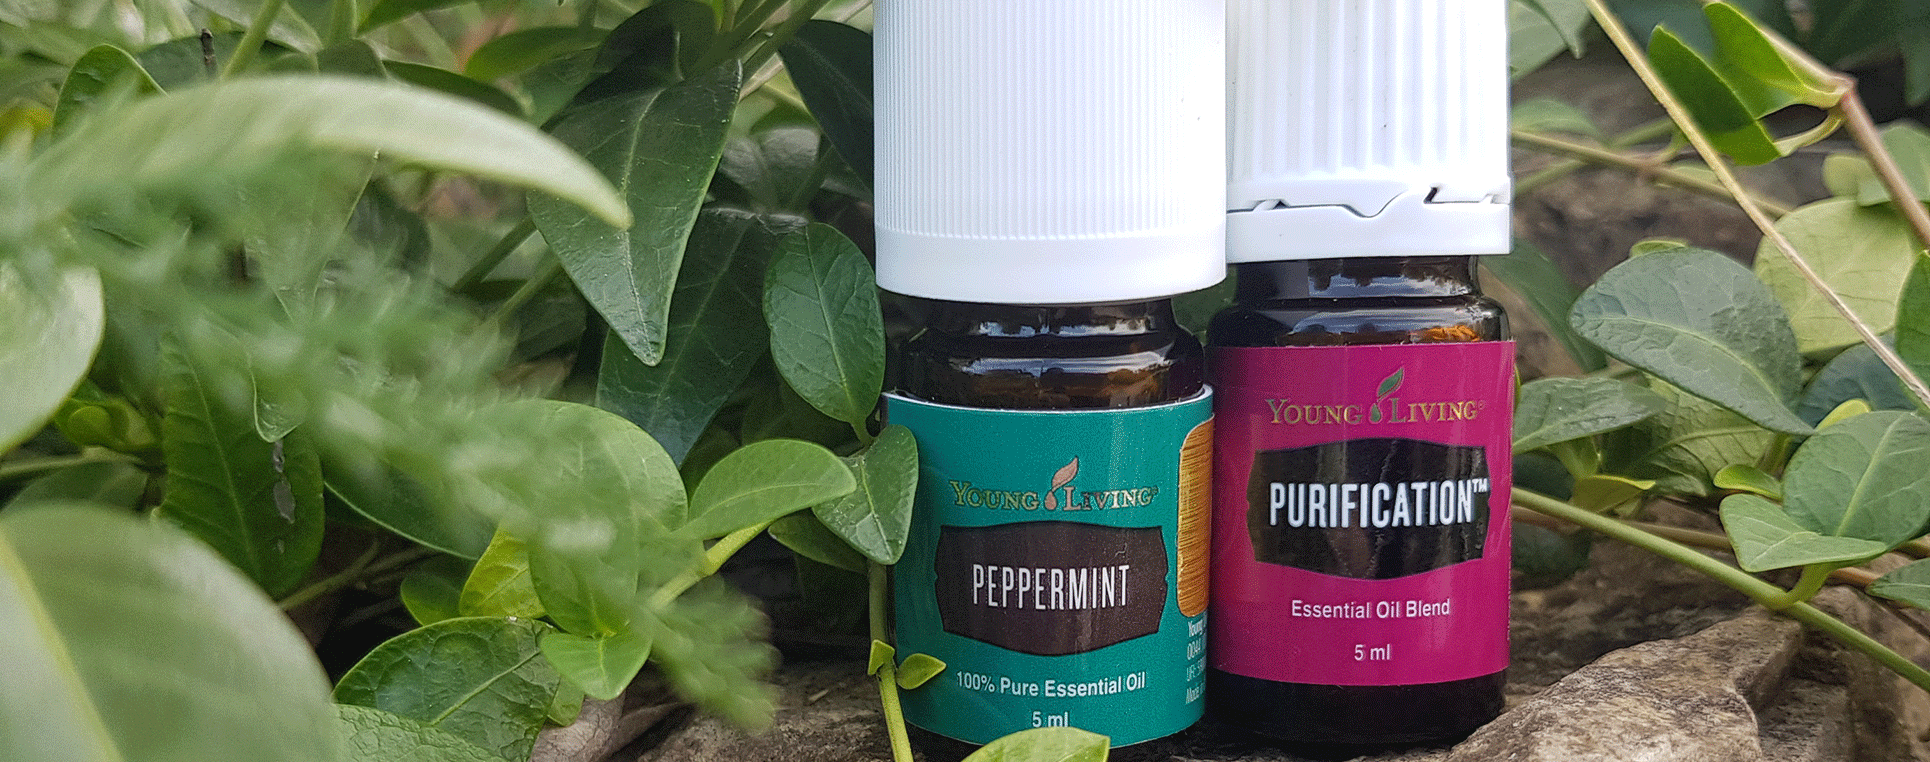 Peppermint_purification